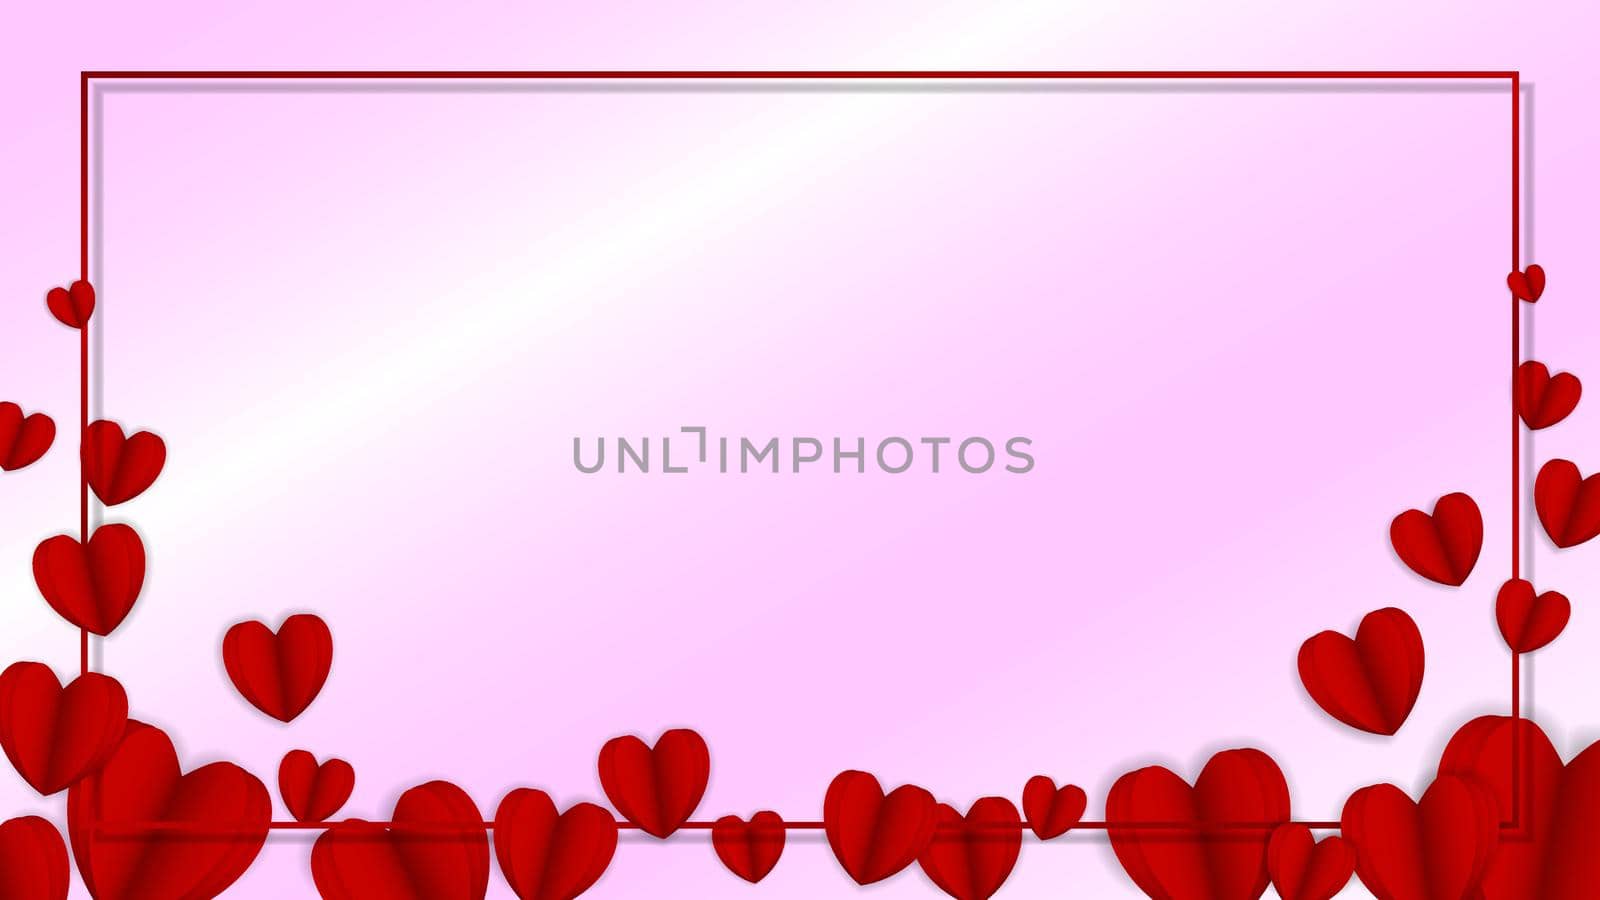 EPS10 vector background with fluttering hearts. Perfect for Valentine's Day or greeting cards. Put your own text. by silentstock639